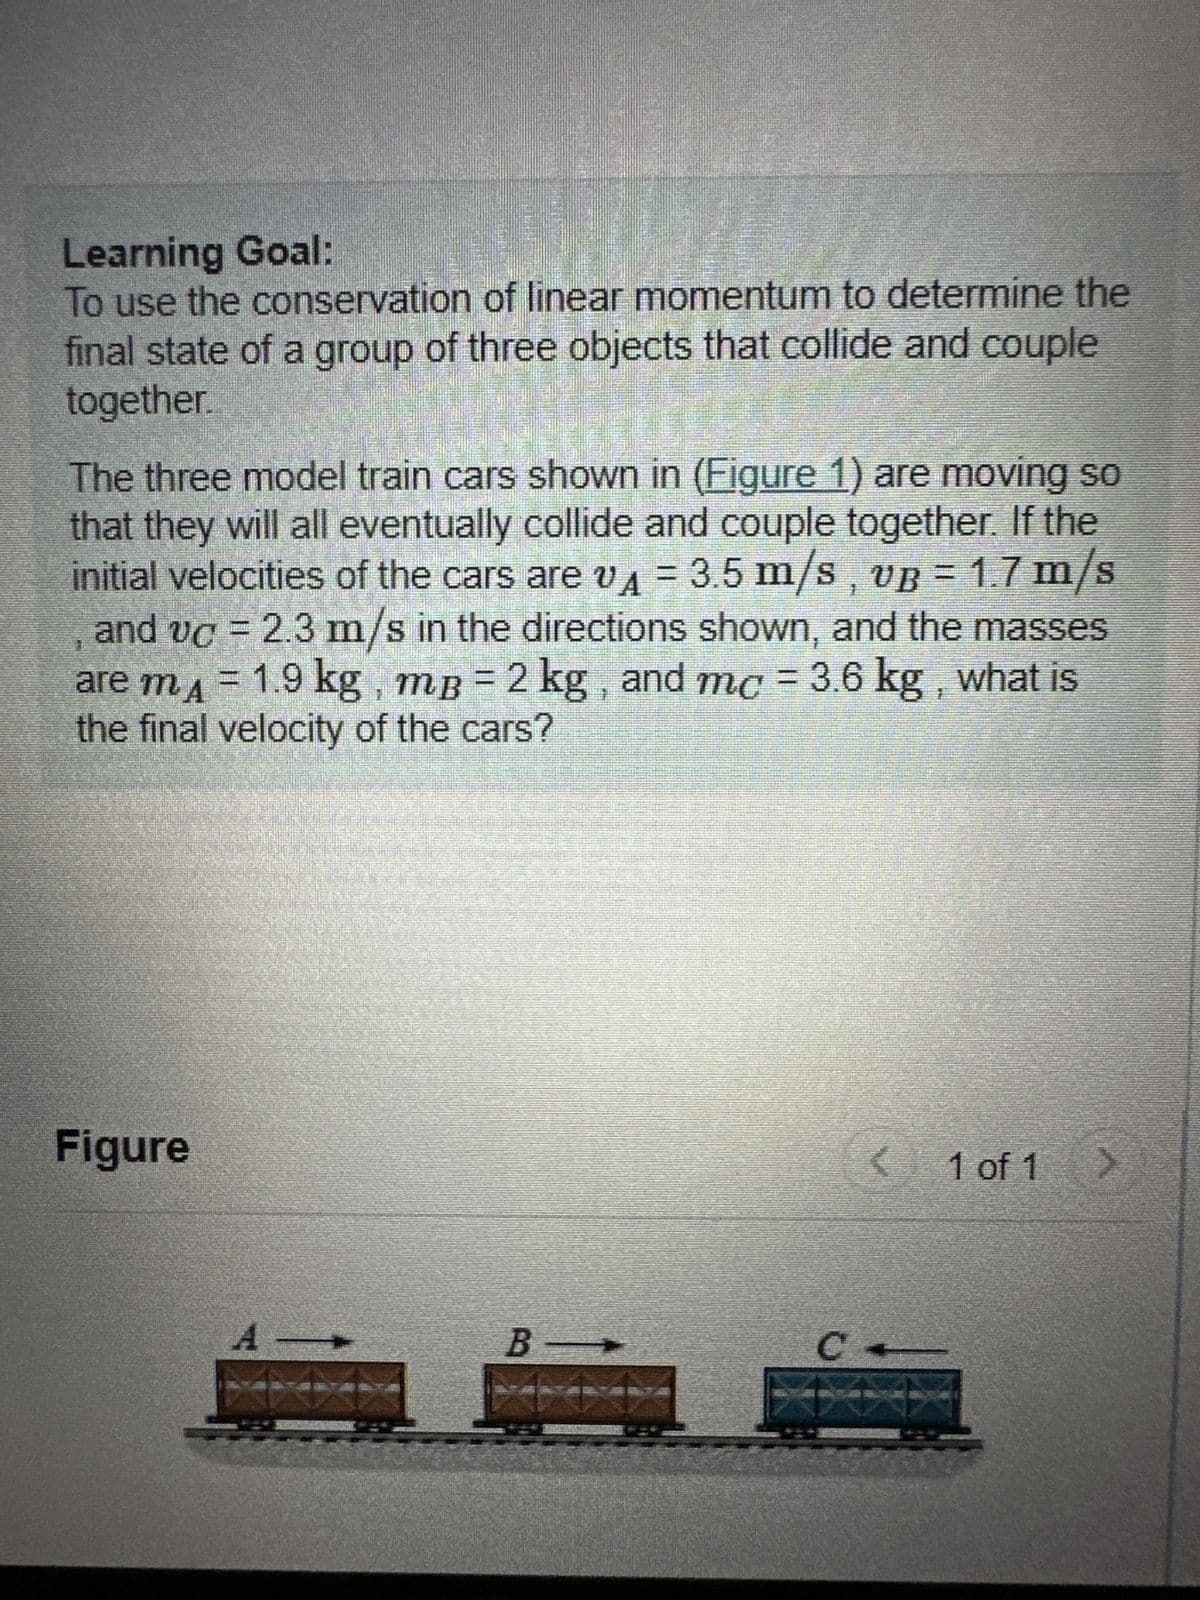 Learning Goal:
To use the conservation of linear momentum to determine the
final state of a group of three objects that collide and couple
together.
The three model train cars shown in (Figure 1) are moving so
that they will all eventually collide and couple together. If the
initial velocities of the cars are A = 3.5 m/s, vB = 1.7 m/s
and vc = 2.3 m/s in the directions shown, and the masses
are m₁ = 1.9 kg, mB = 2 kg, and mc = 3.6 kg, what is
the final velocity of the cars?
Figure
A →
B —
C
(
1 of 1
>